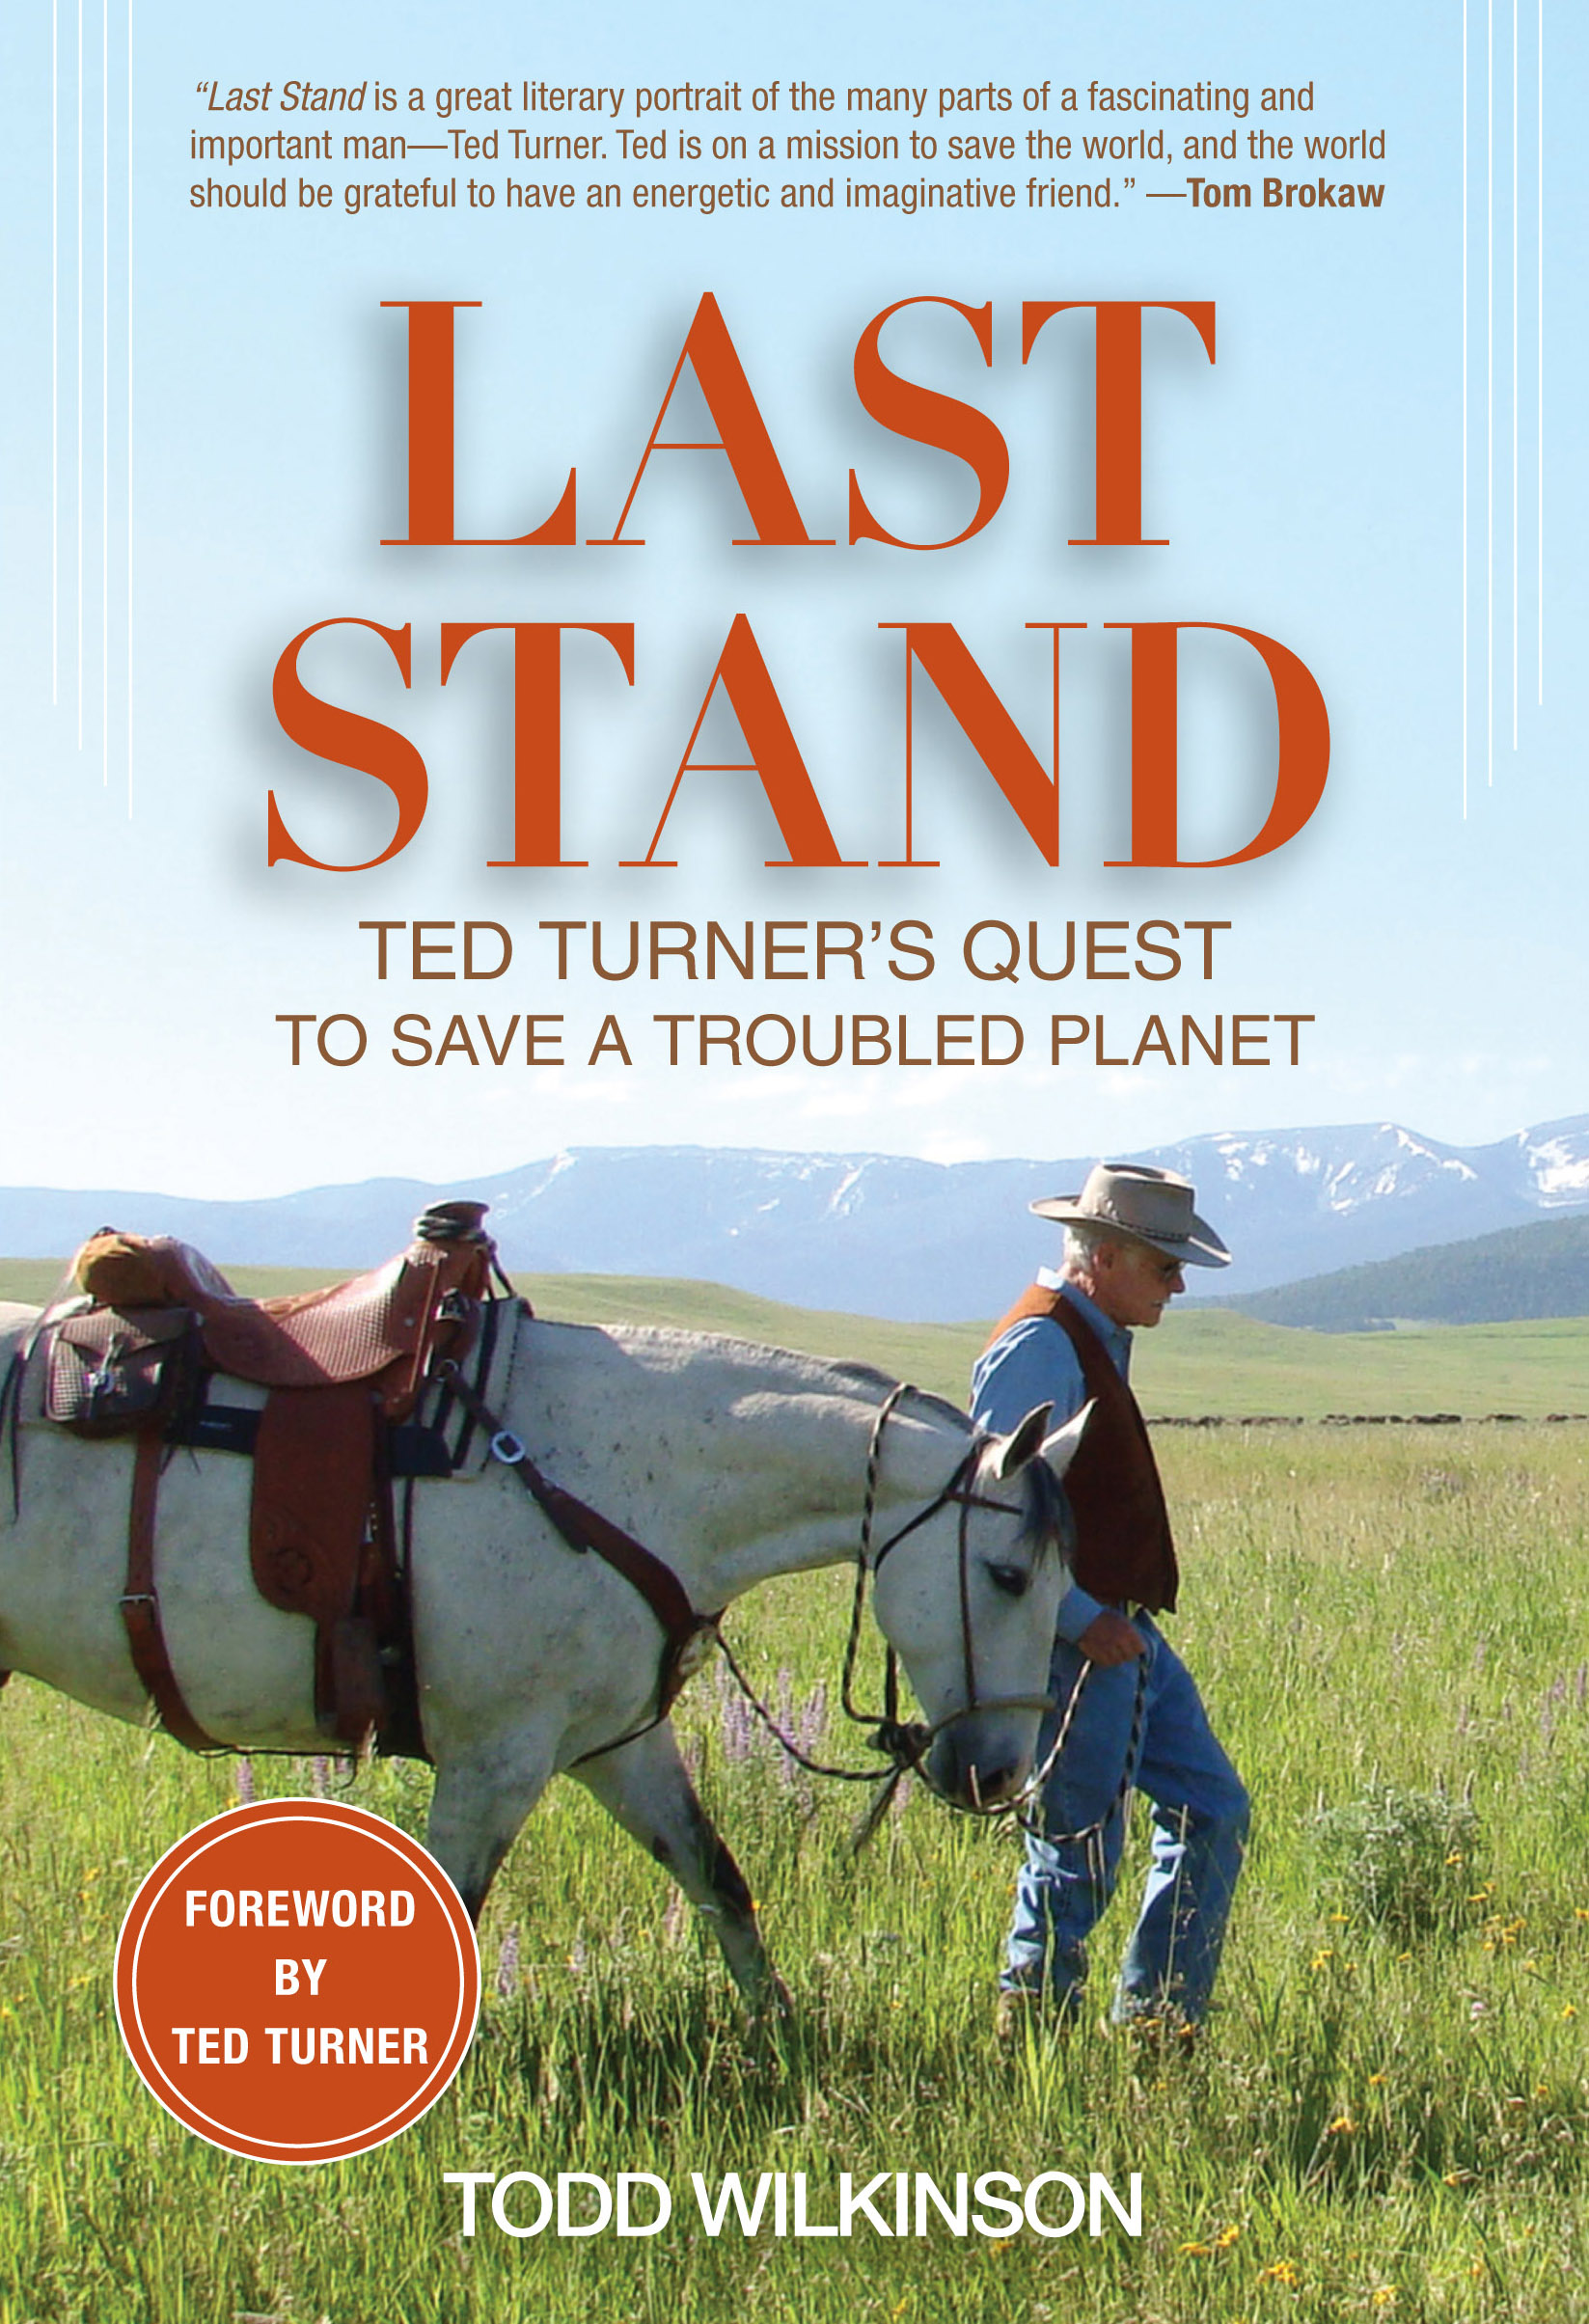 Ted Turner Talks Montana, Bison, Capitalism & The Book Last Stand